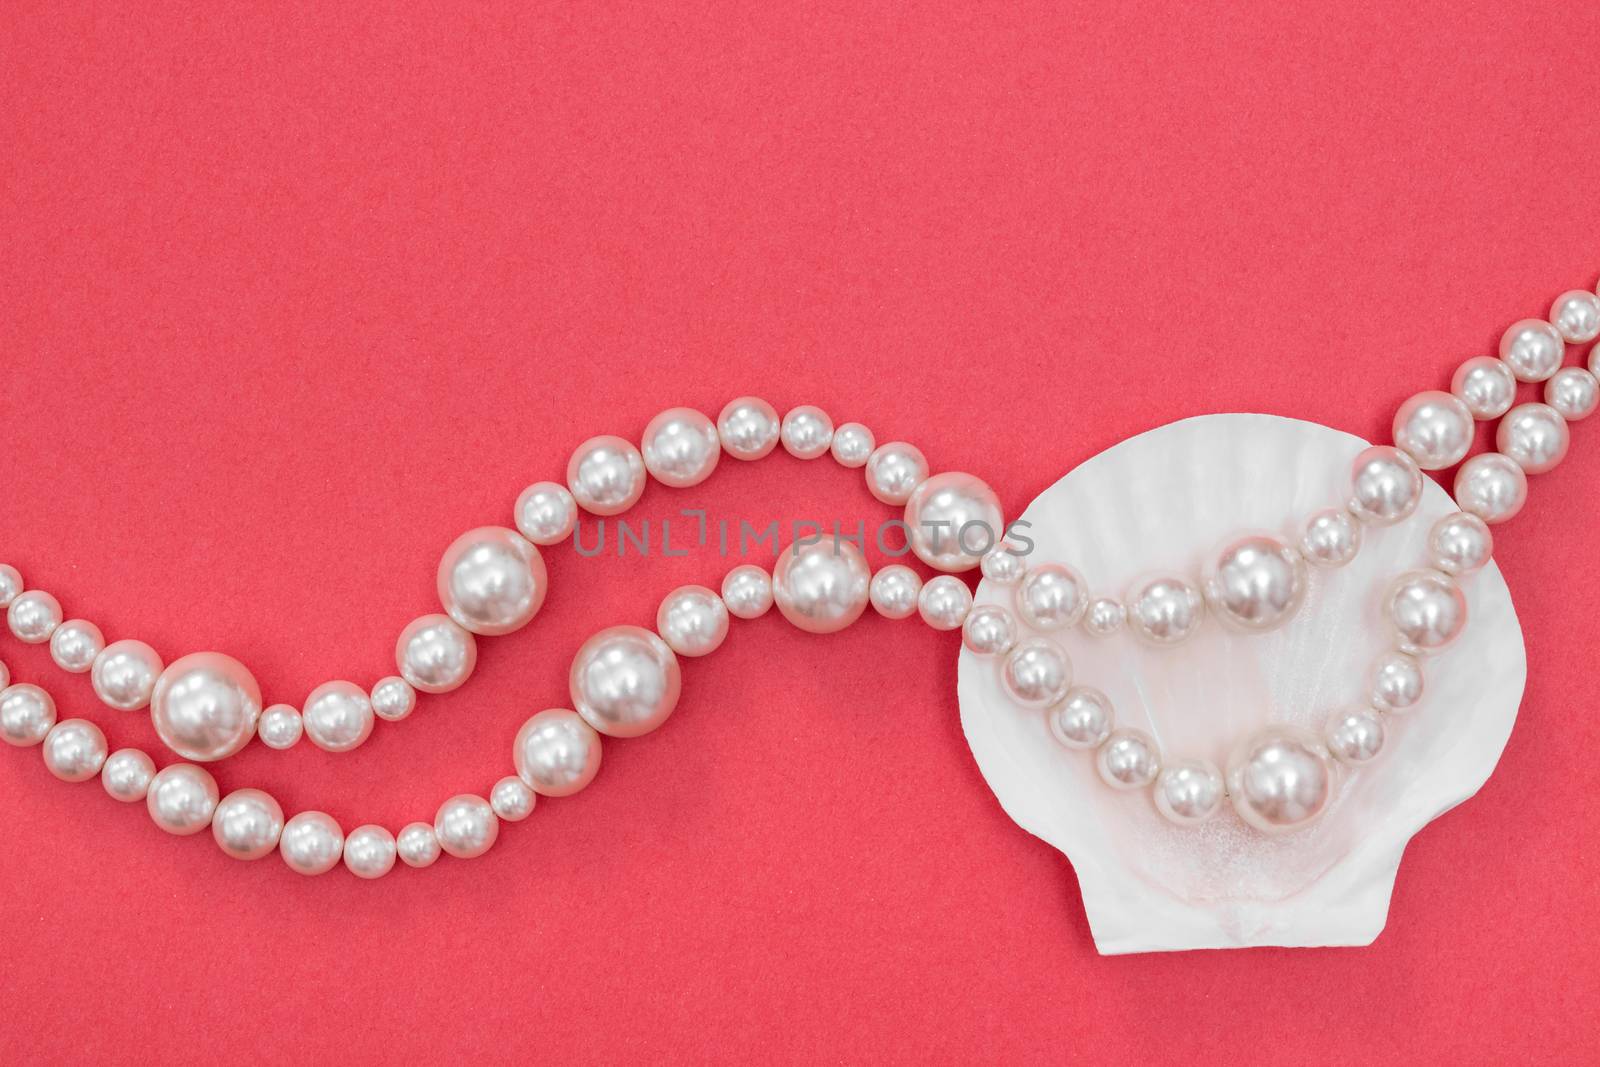 Pearl necklace and seashell on pink background by anikasalsera